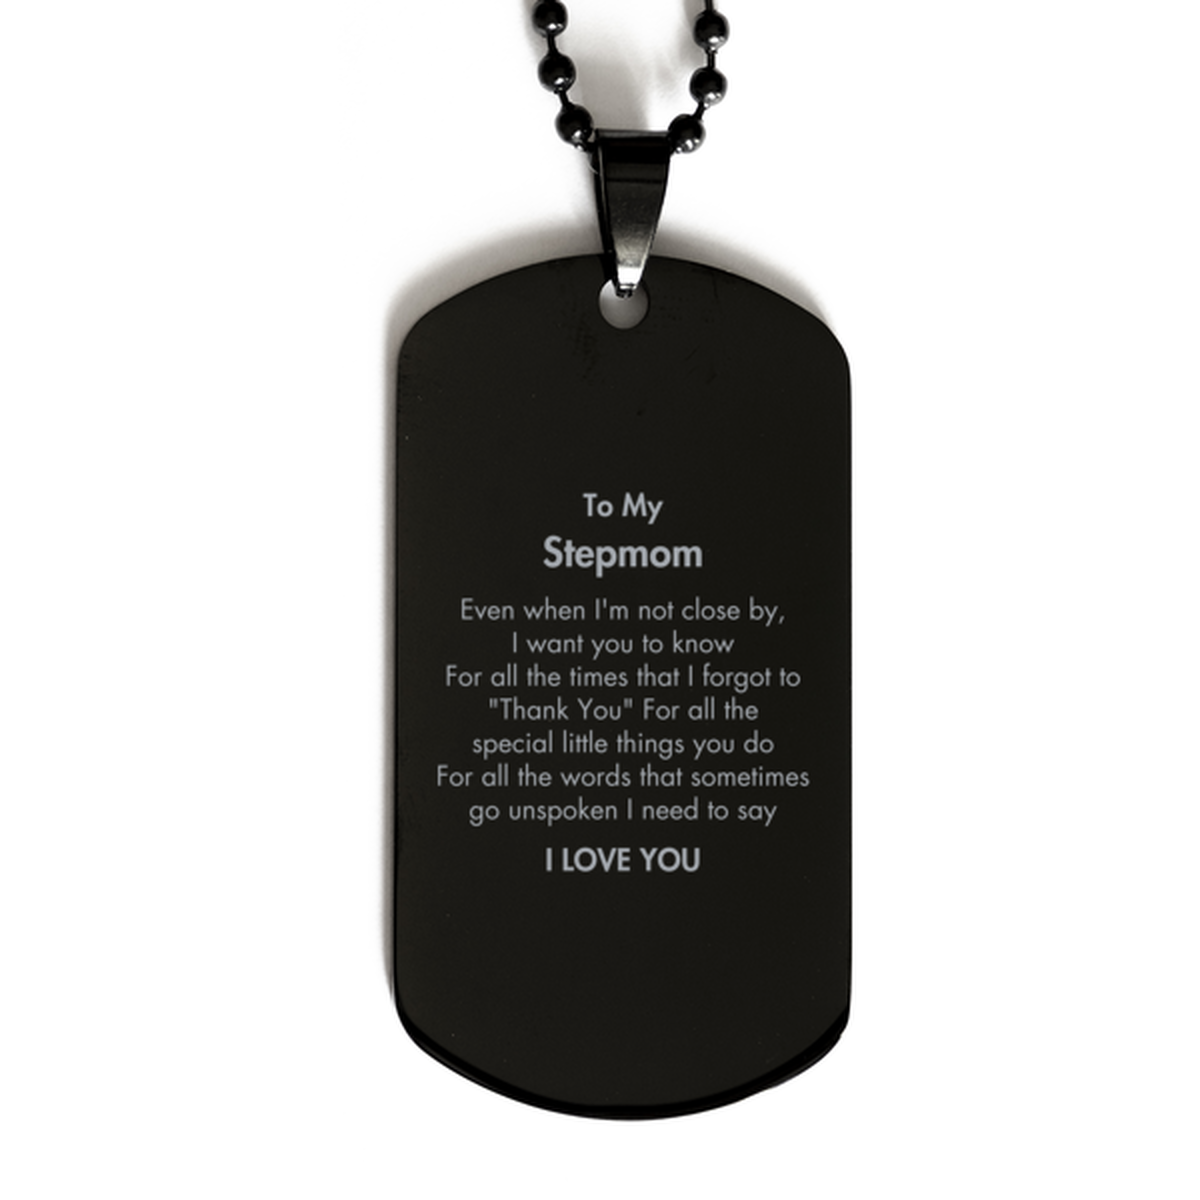 Thank You Gifts for Stepmom, Keepsake Black Dog Tag Gifts for Stepmom Birthday Mother's day Father's Day Stepmom For all the words That sometimes go unspoken I need to say I LOVE YOU